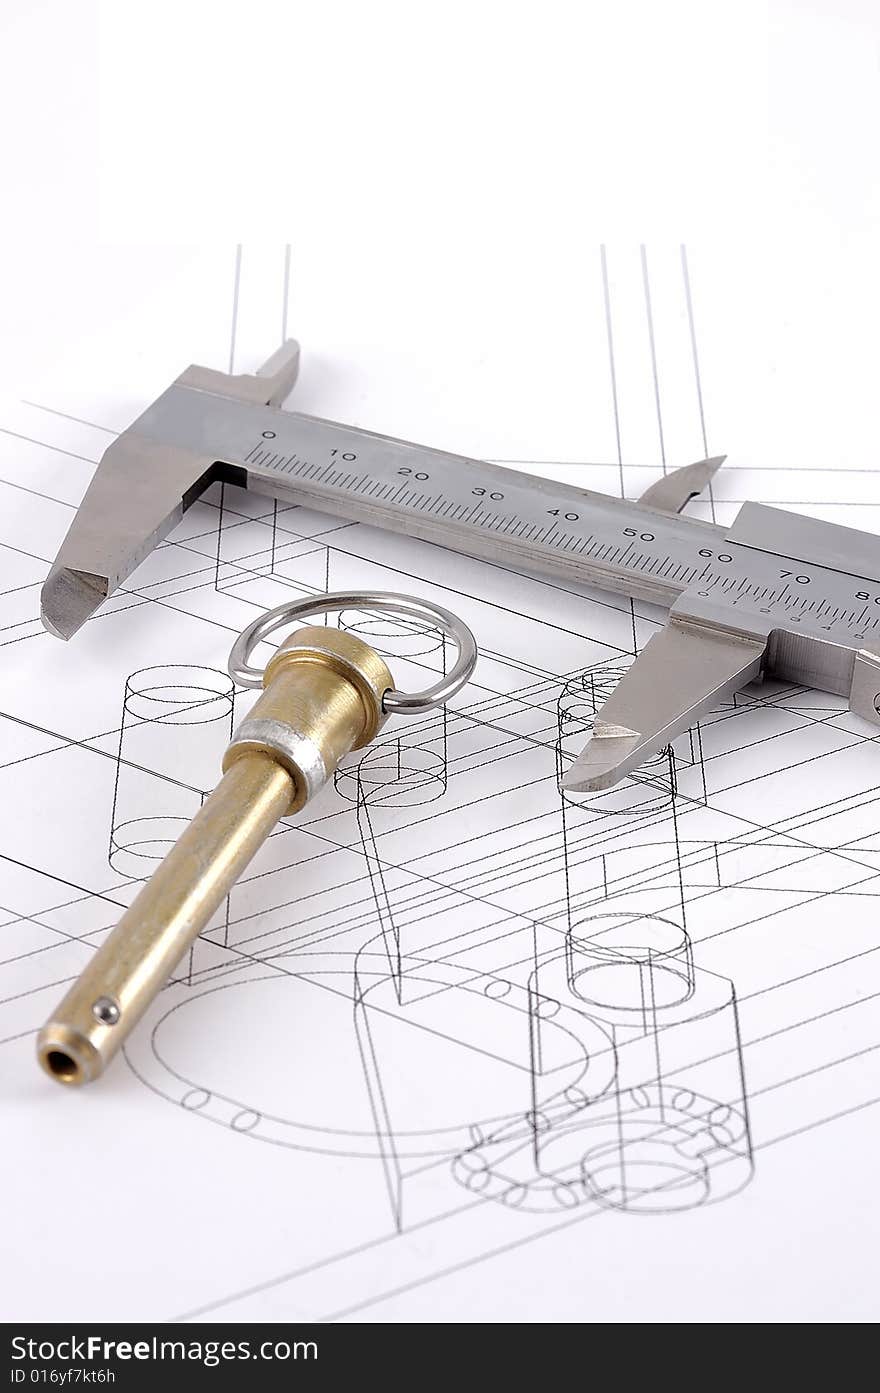 A pip-pin and calipers on a technical drawing with selective focus